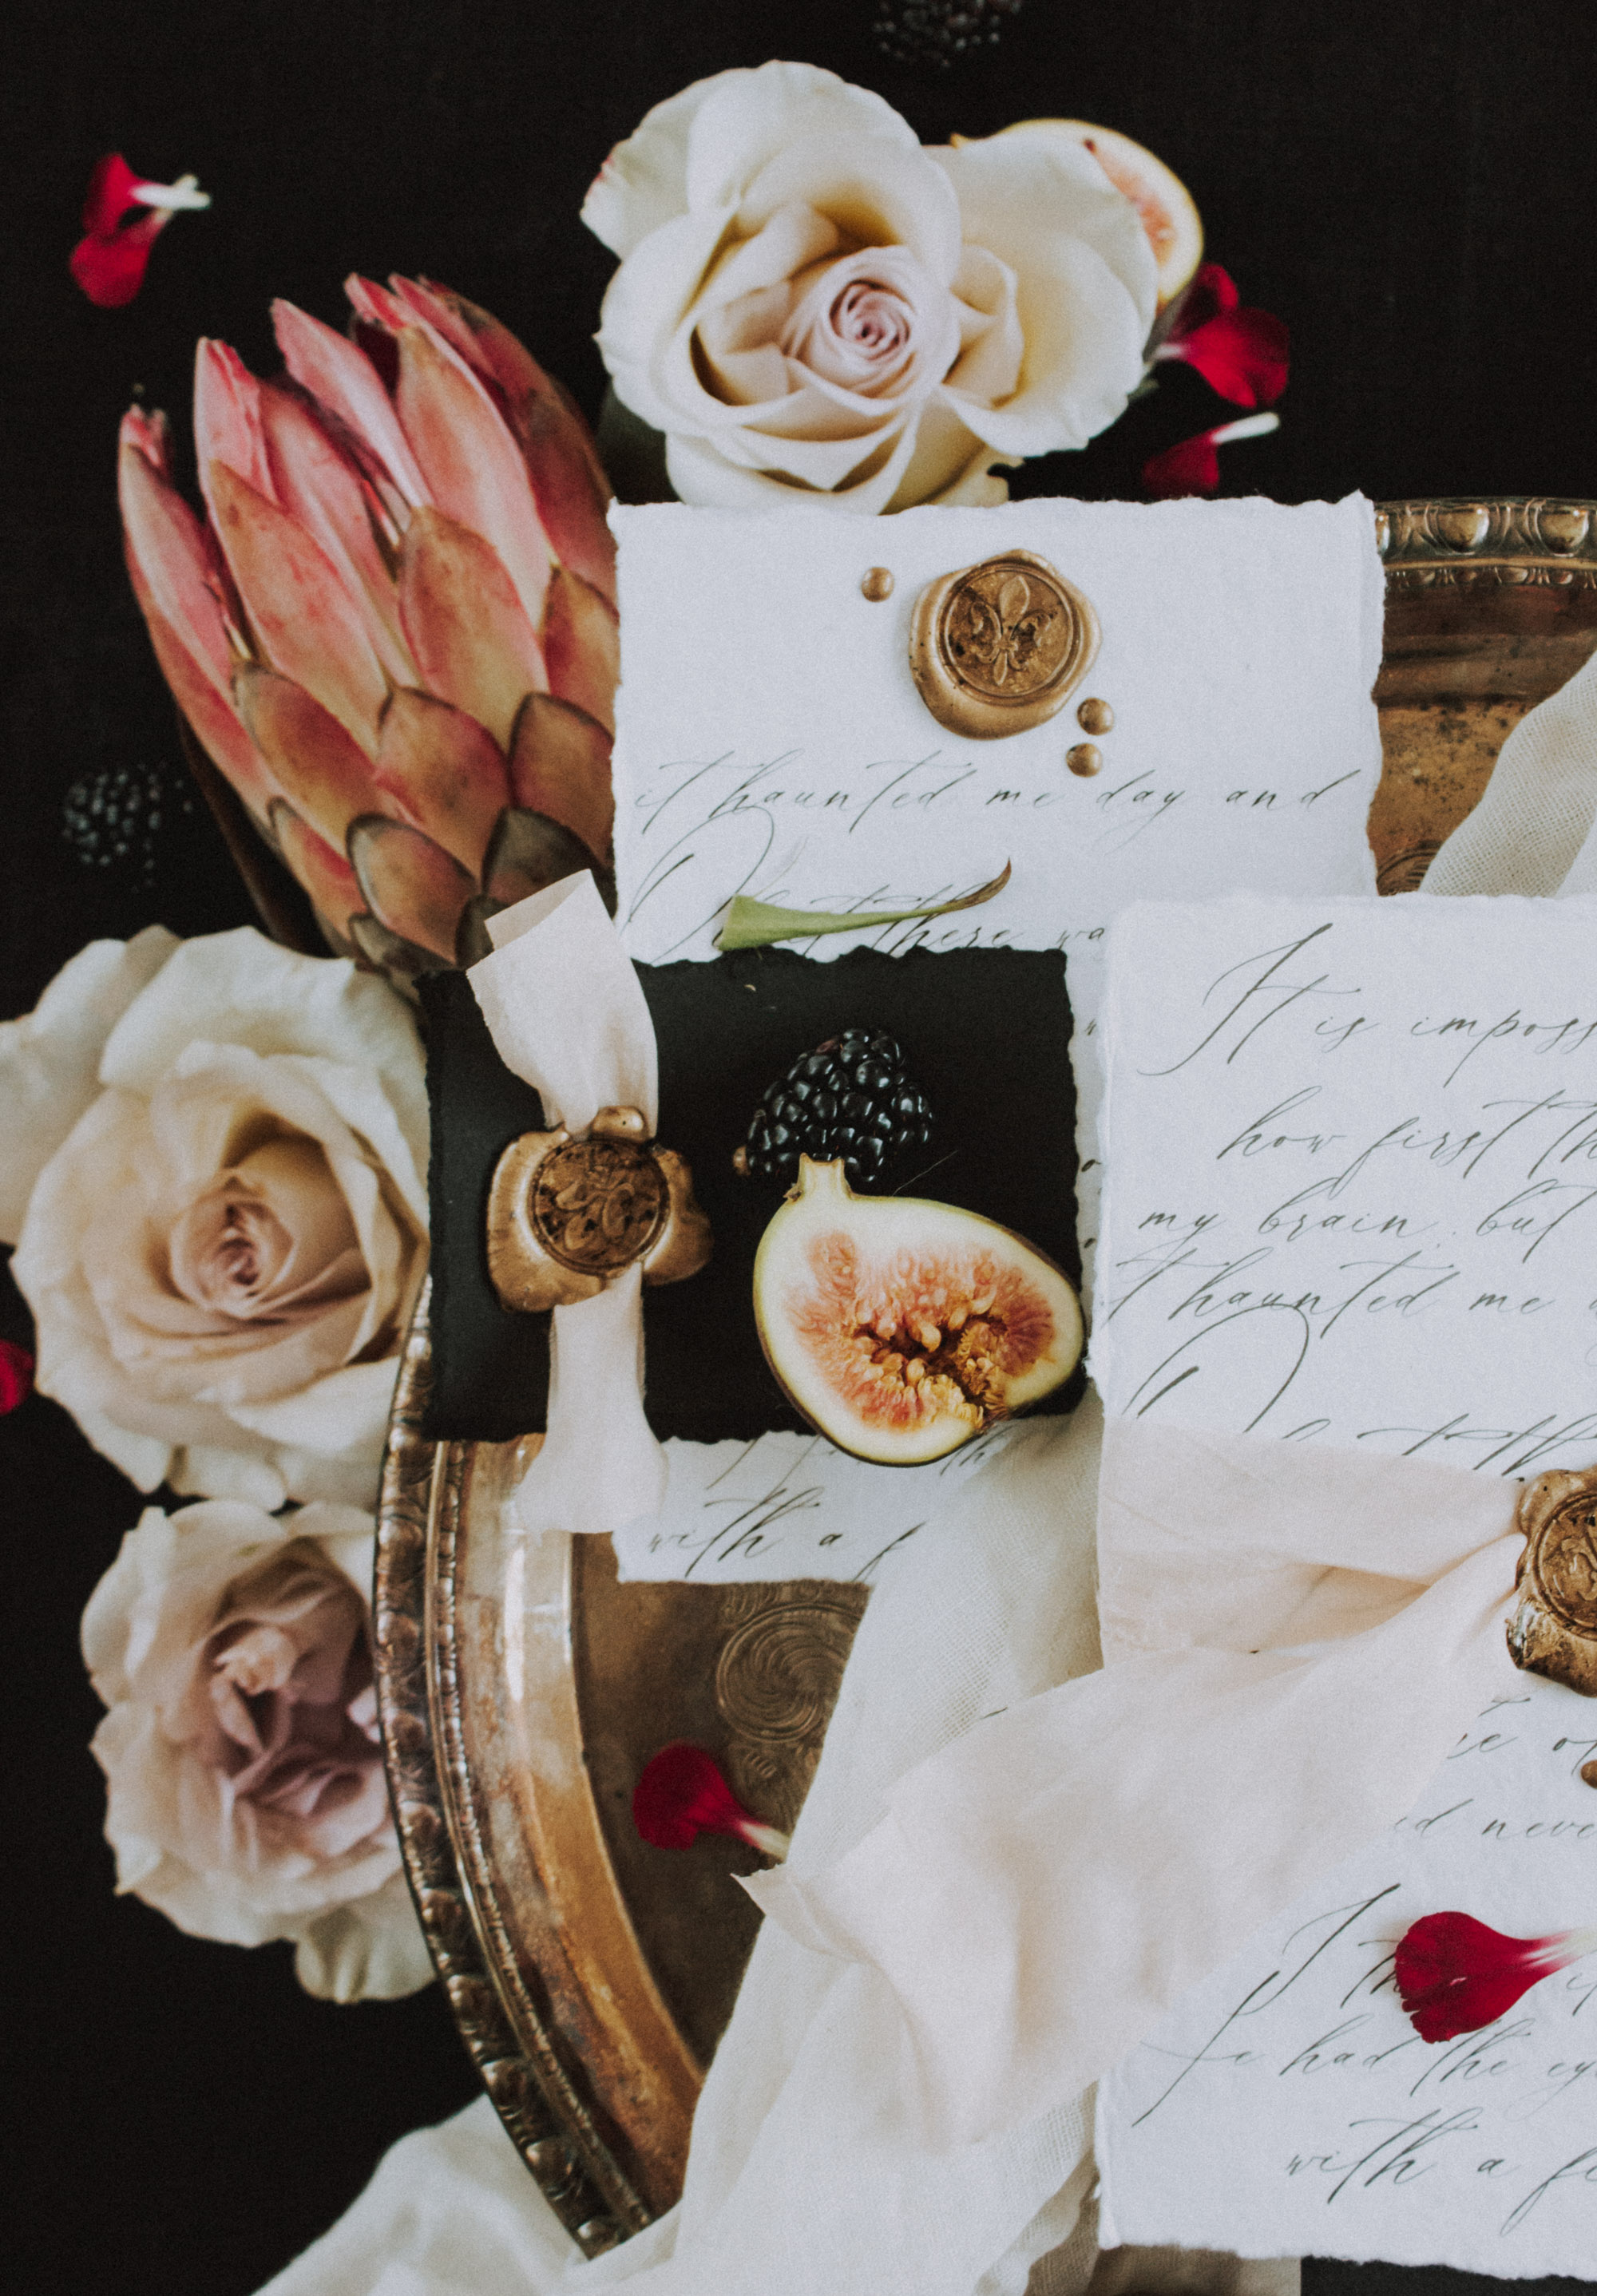 Romantic Black, White, and Gold Calligraphy Stationery Inspiration by Lustre Theory with Seniman Calligraphy on Fringe & Rose Handmade Paper